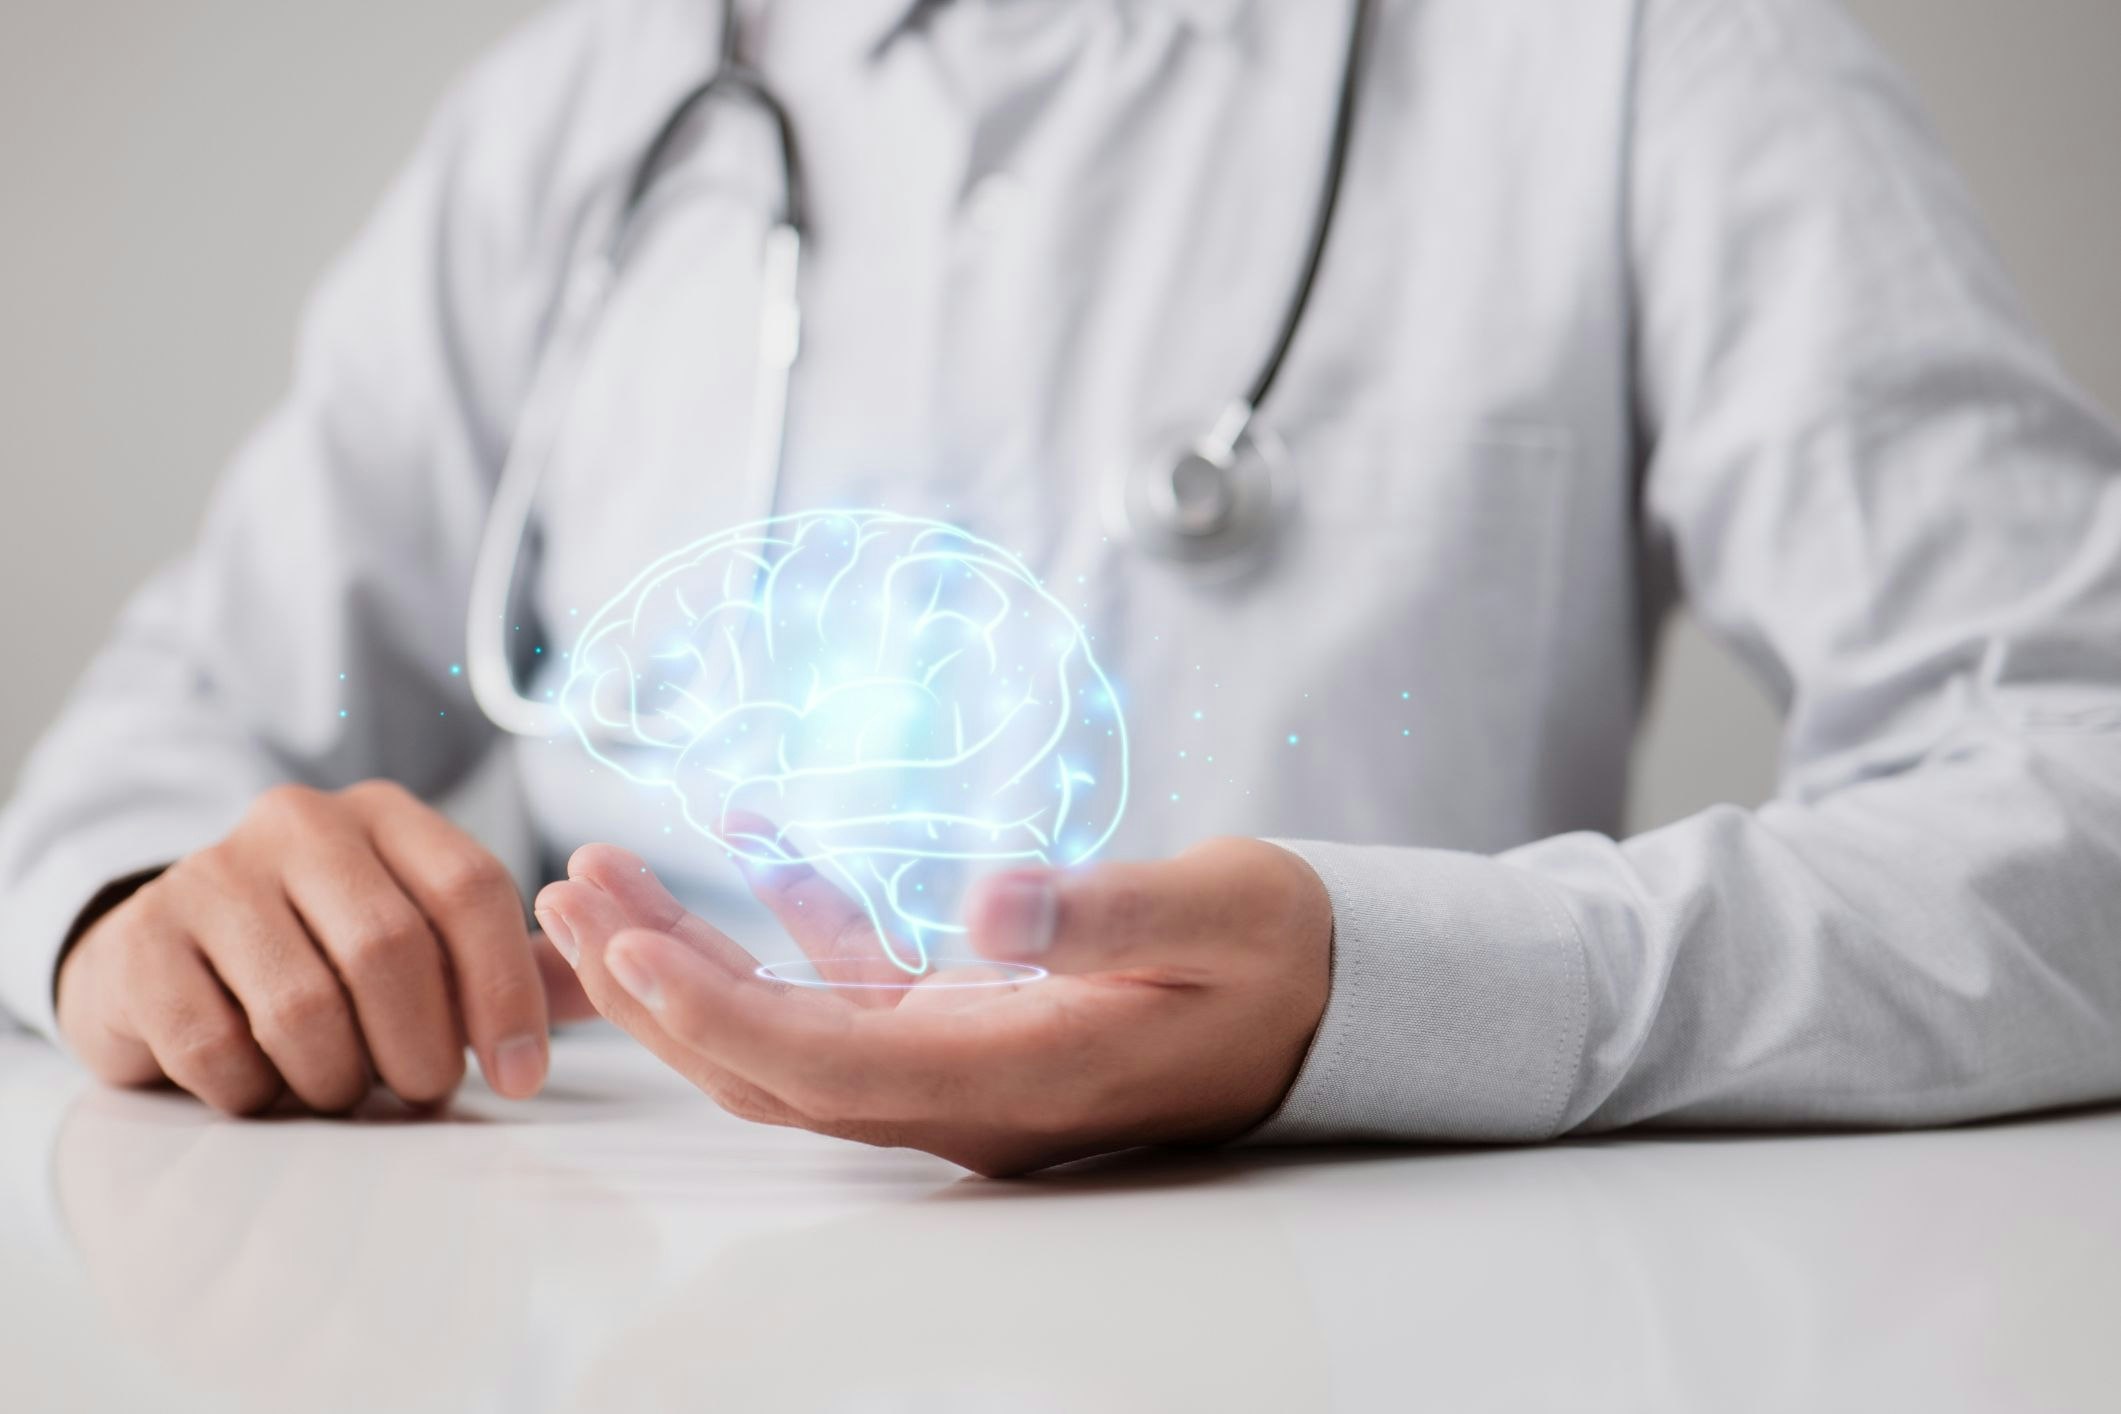 A national summit about neurological conditions and change required in the healthcare system is being held to ensure that affected Australians get appropriate care. [Source: Shutterstock]
